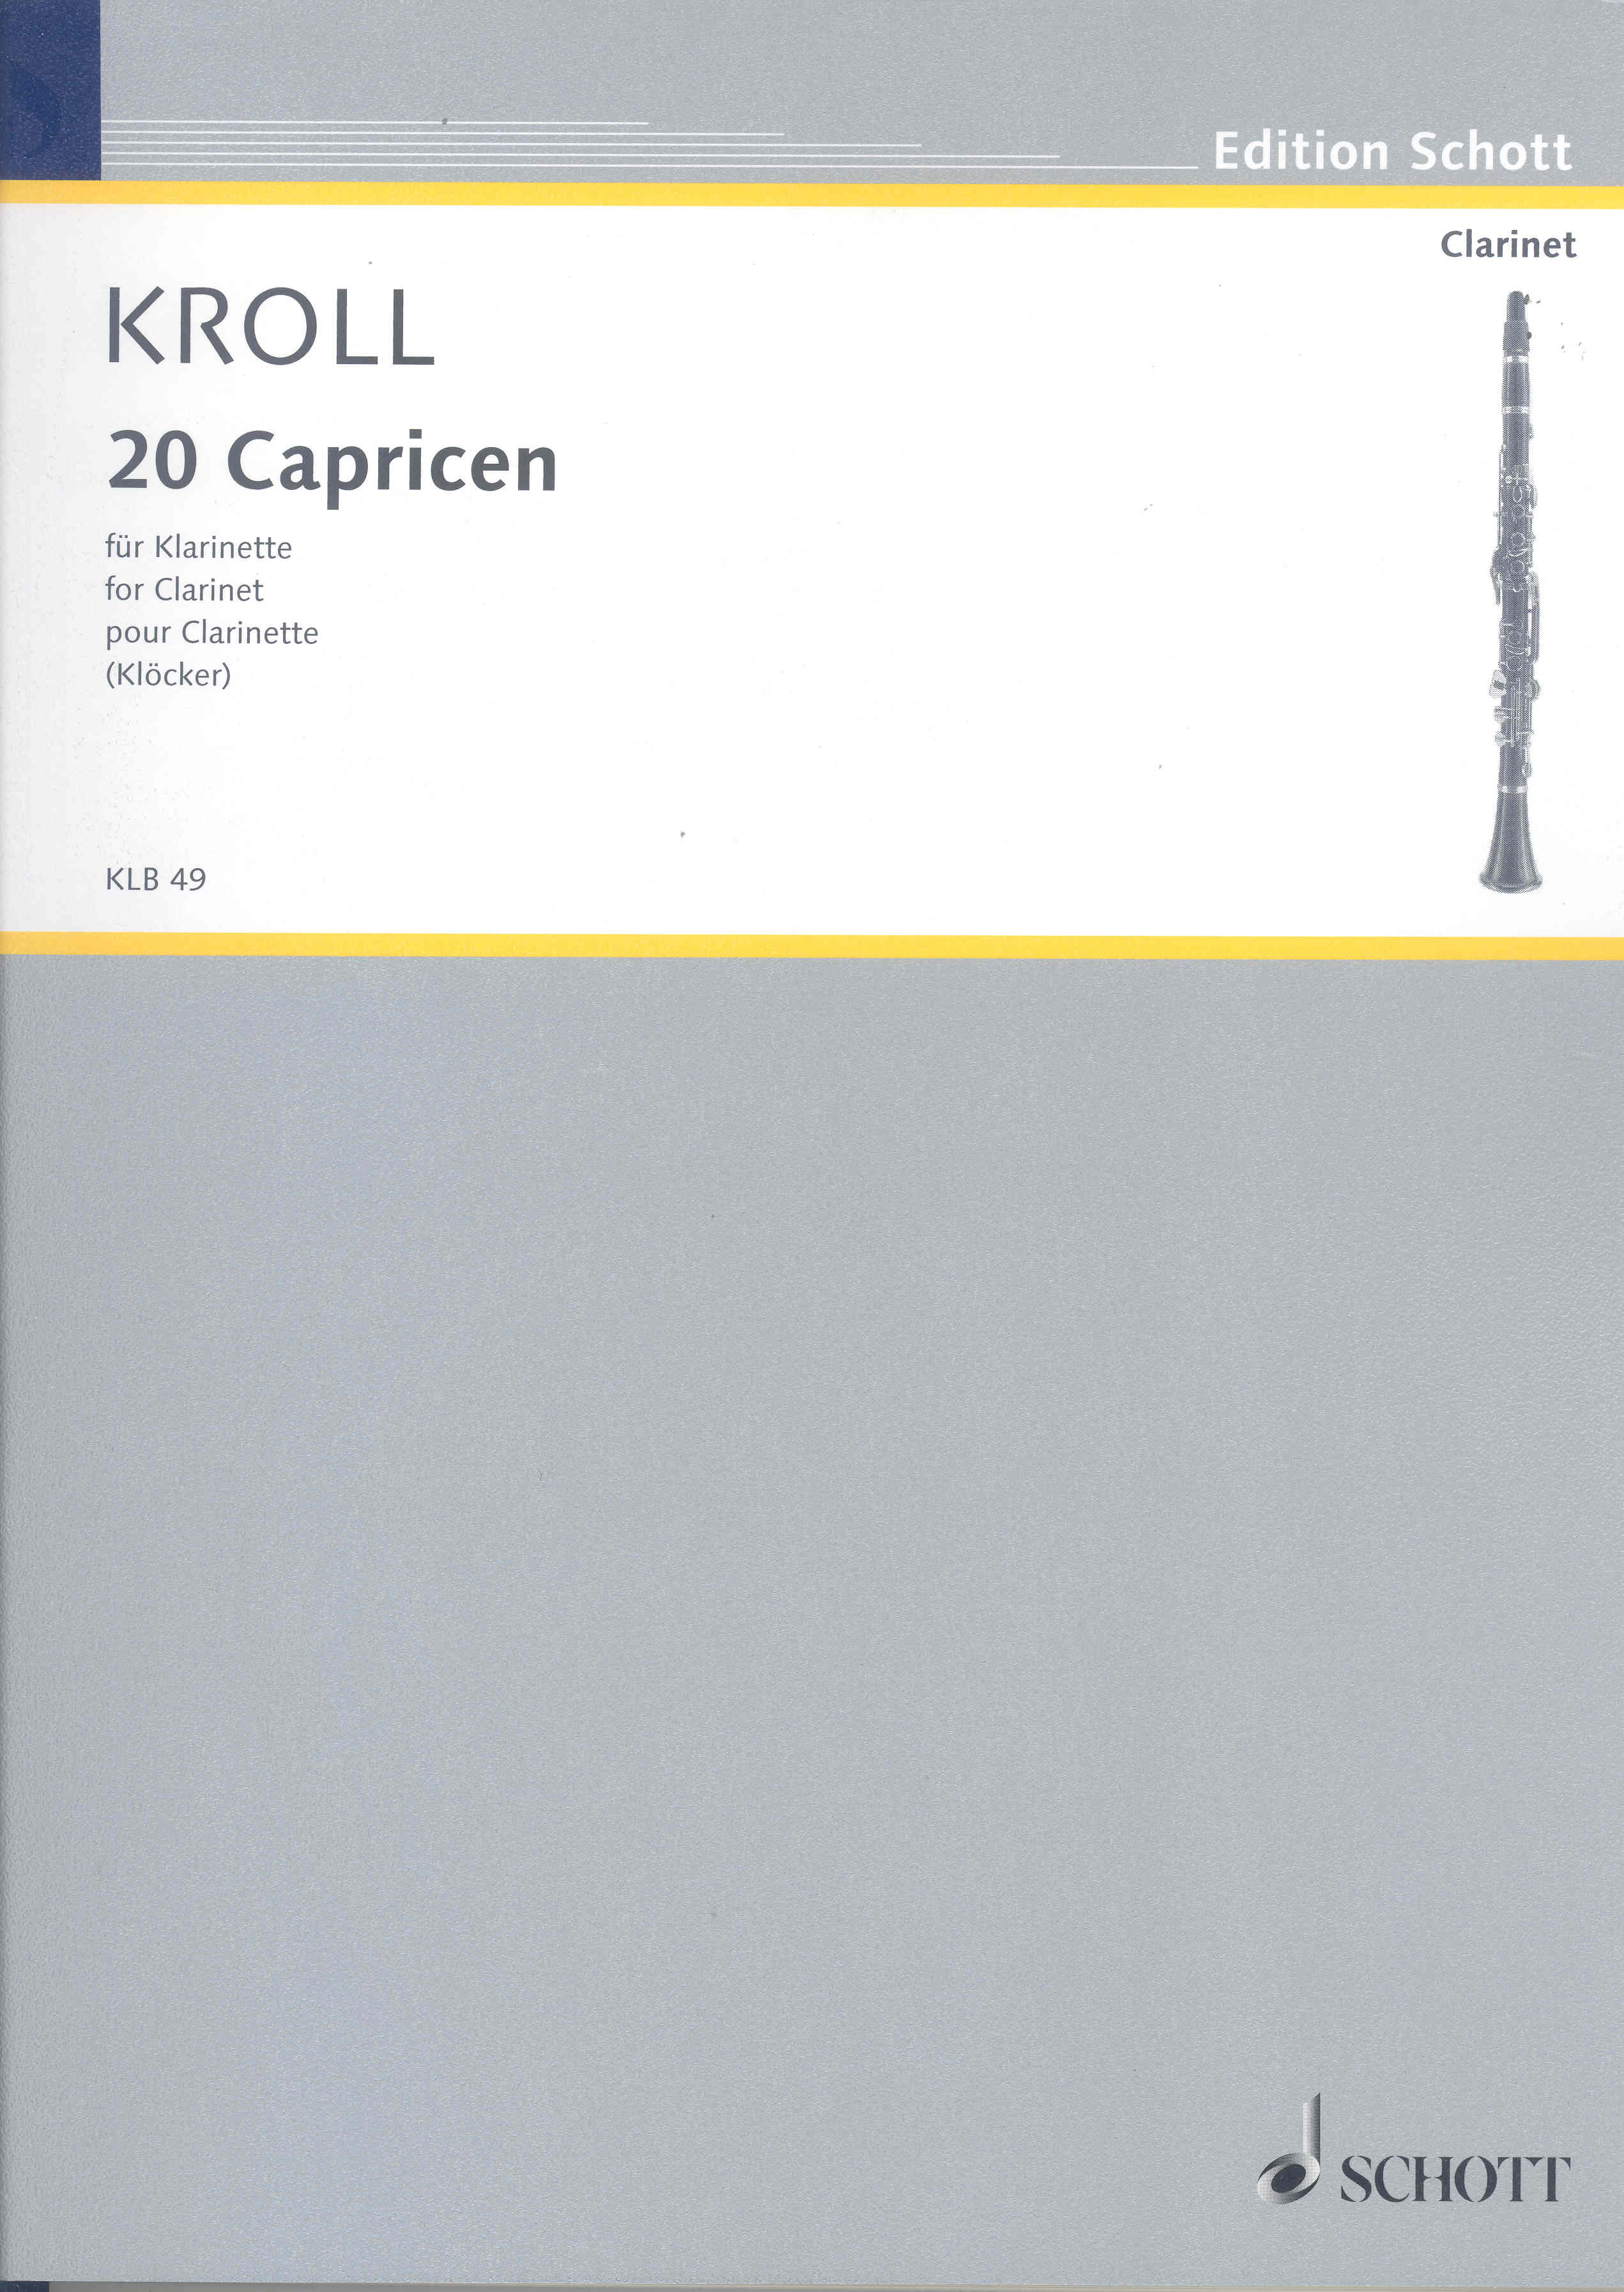 Kroll 20 Caprices Clarinet Sheet Music Songbook